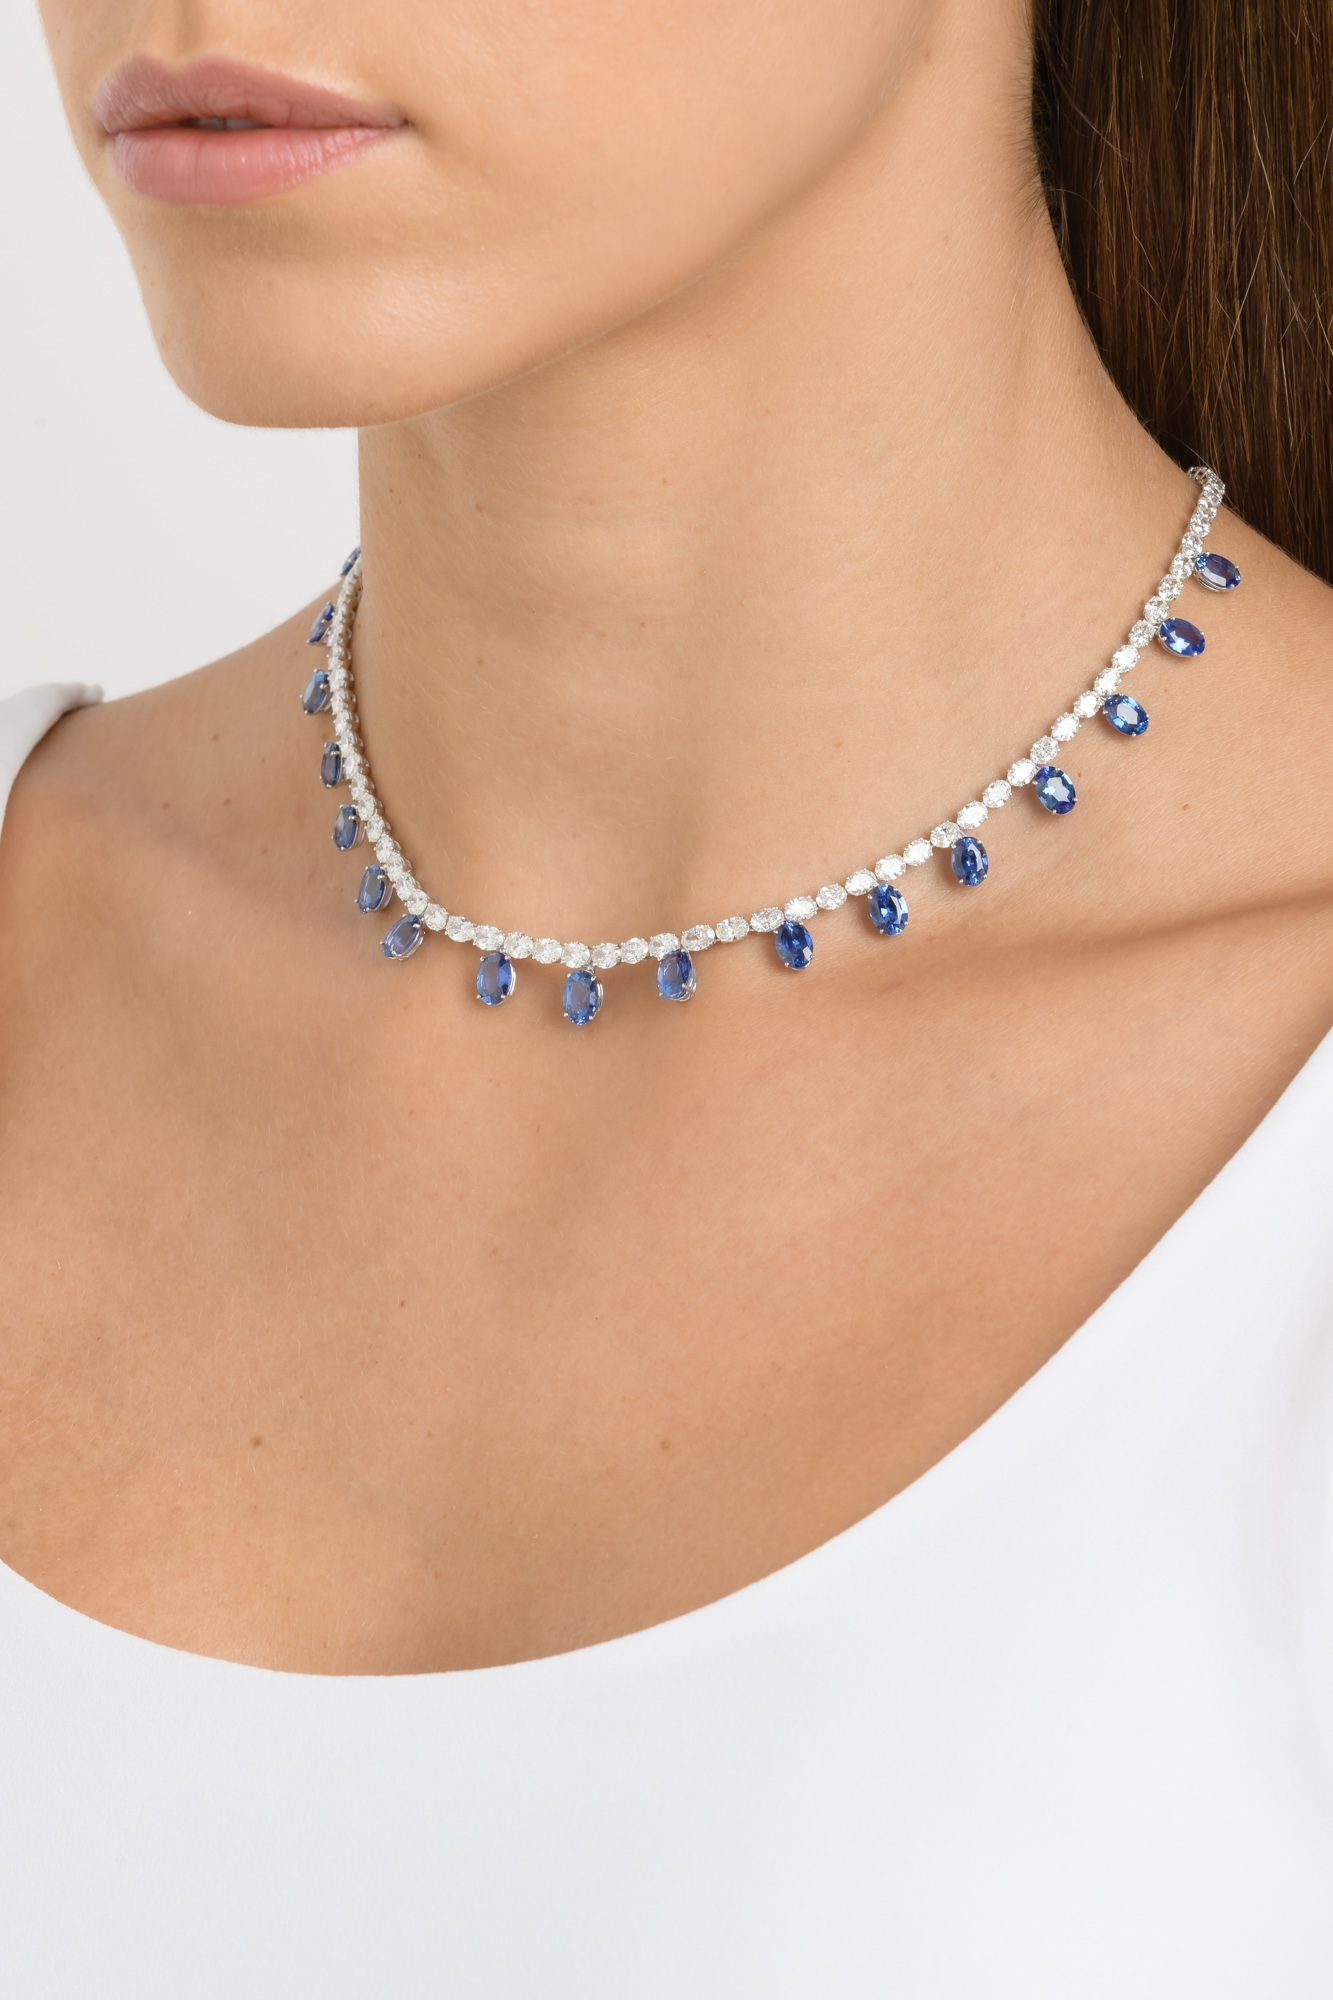 Diamond necklace with one pear shaped and two oval sapphires in white gold  - BAUNAT